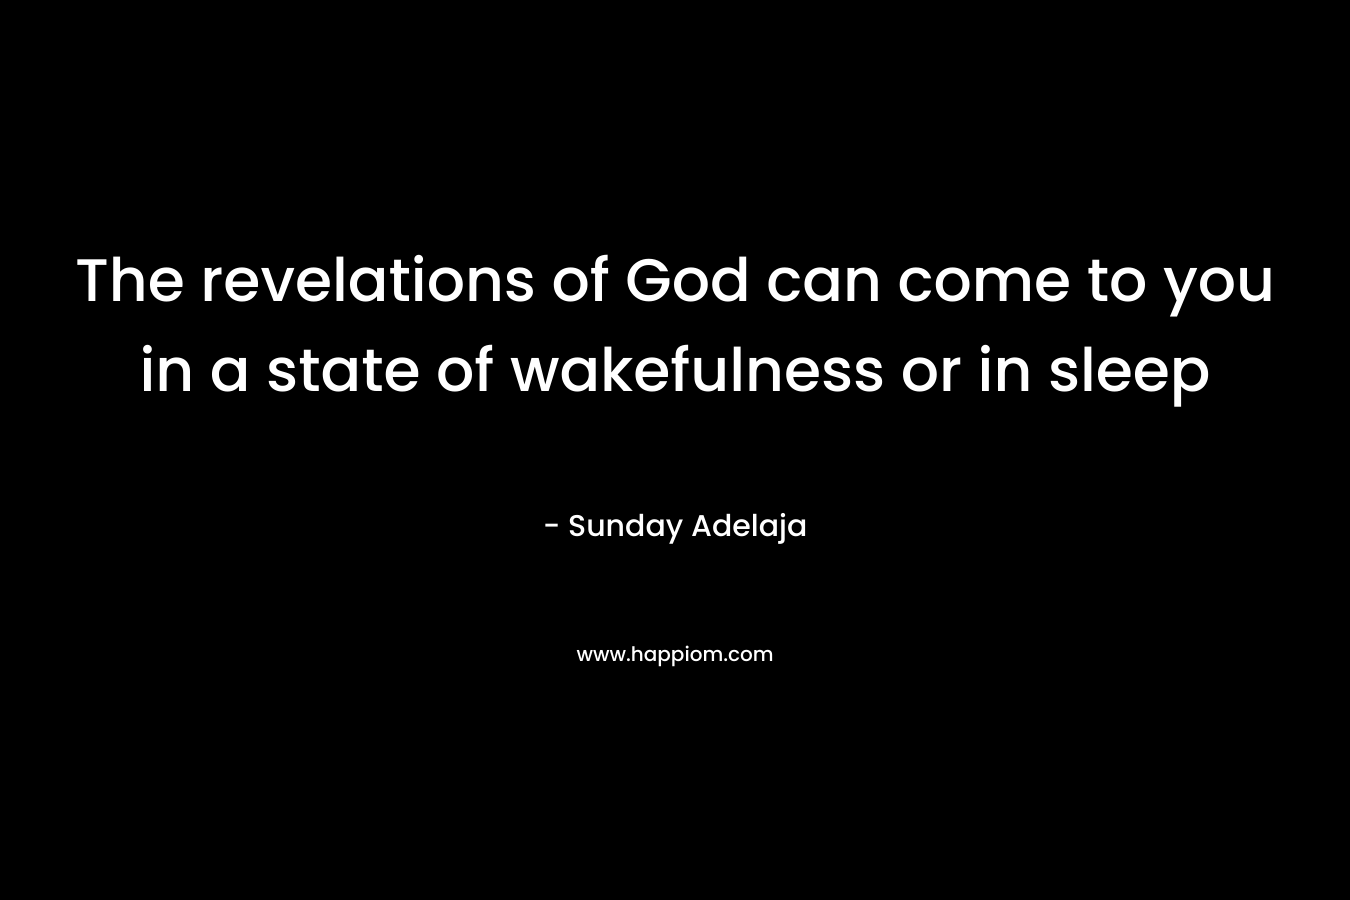 The revelations of God can come to you in a state of wakefulness or in sleep